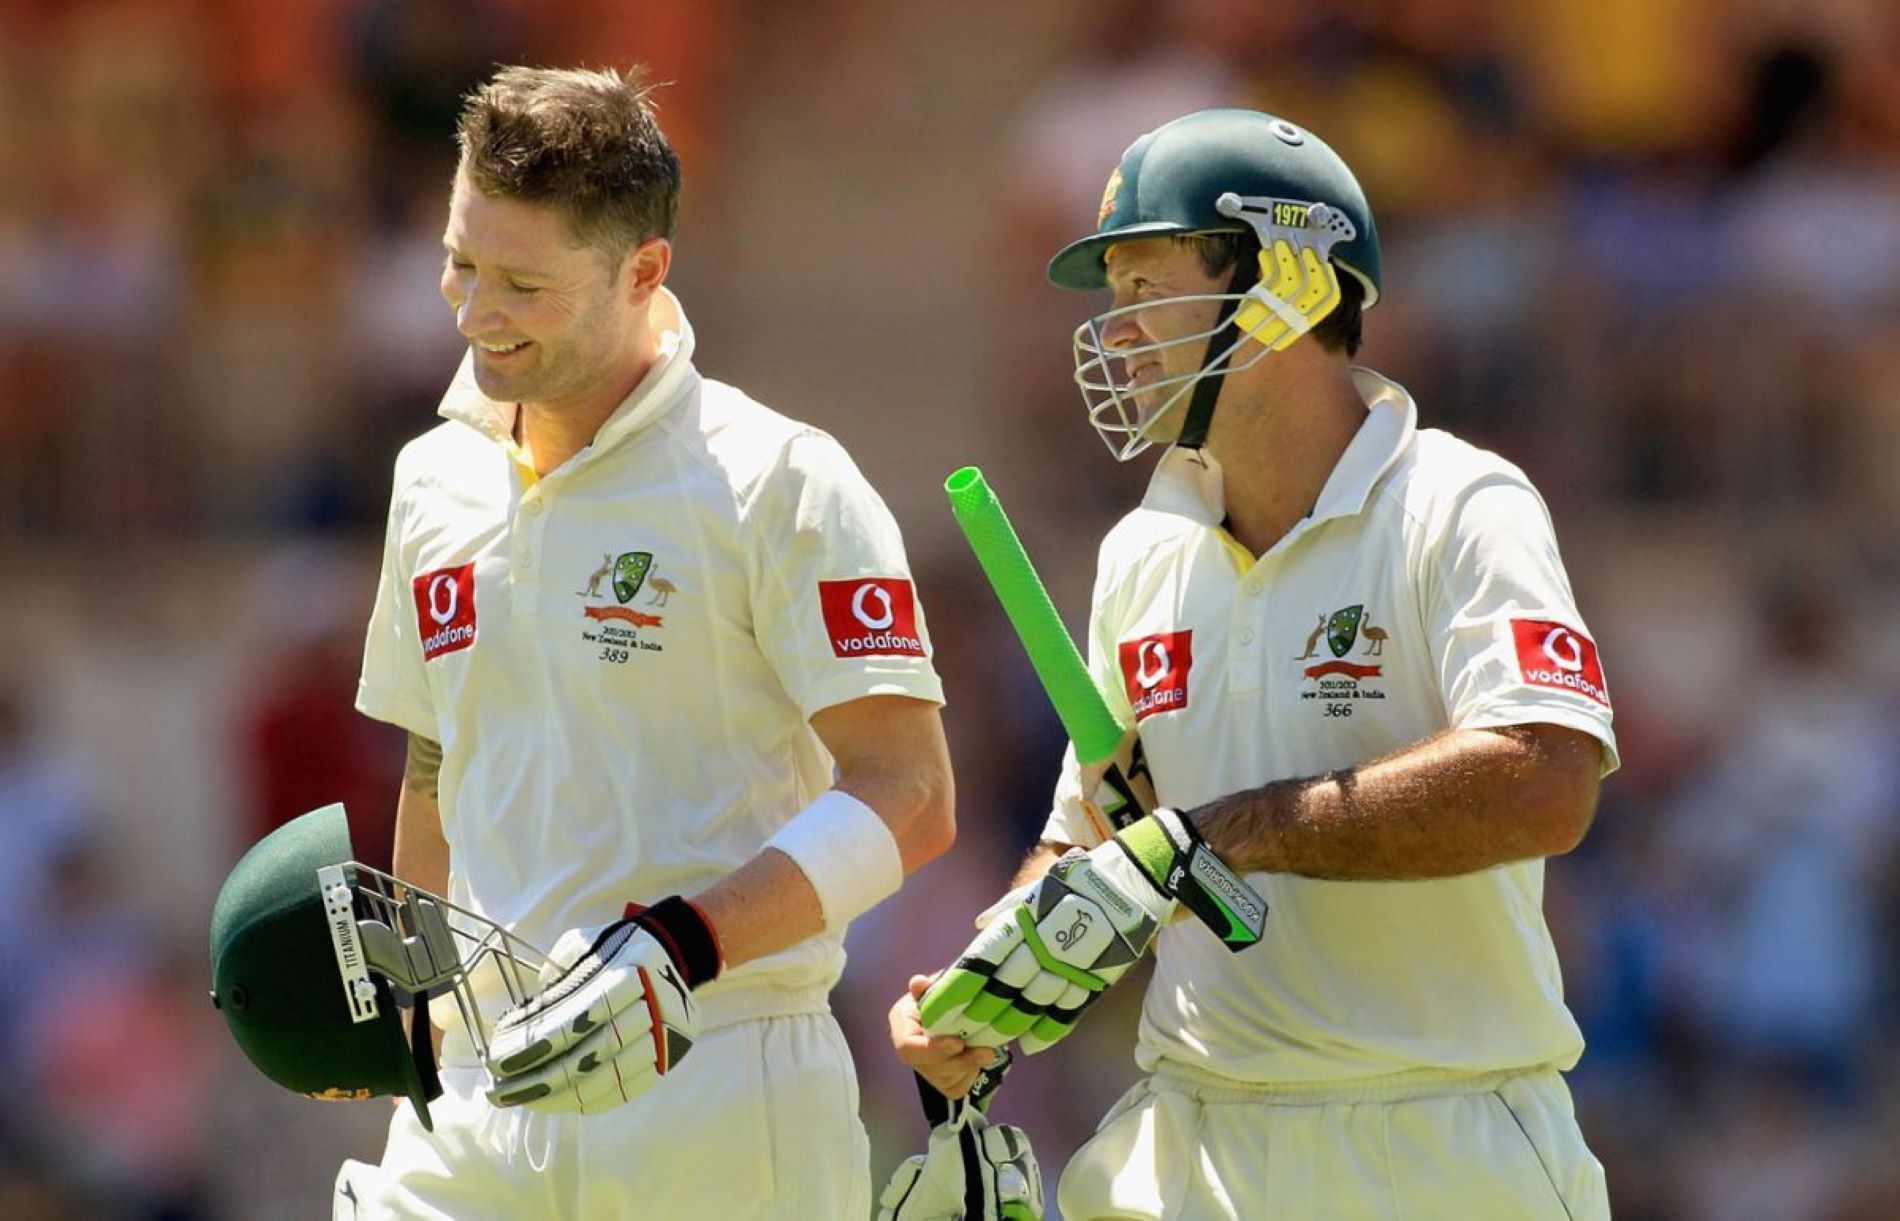 Ricky Ponting and Micheal Clarke tormented India through the 2012 series